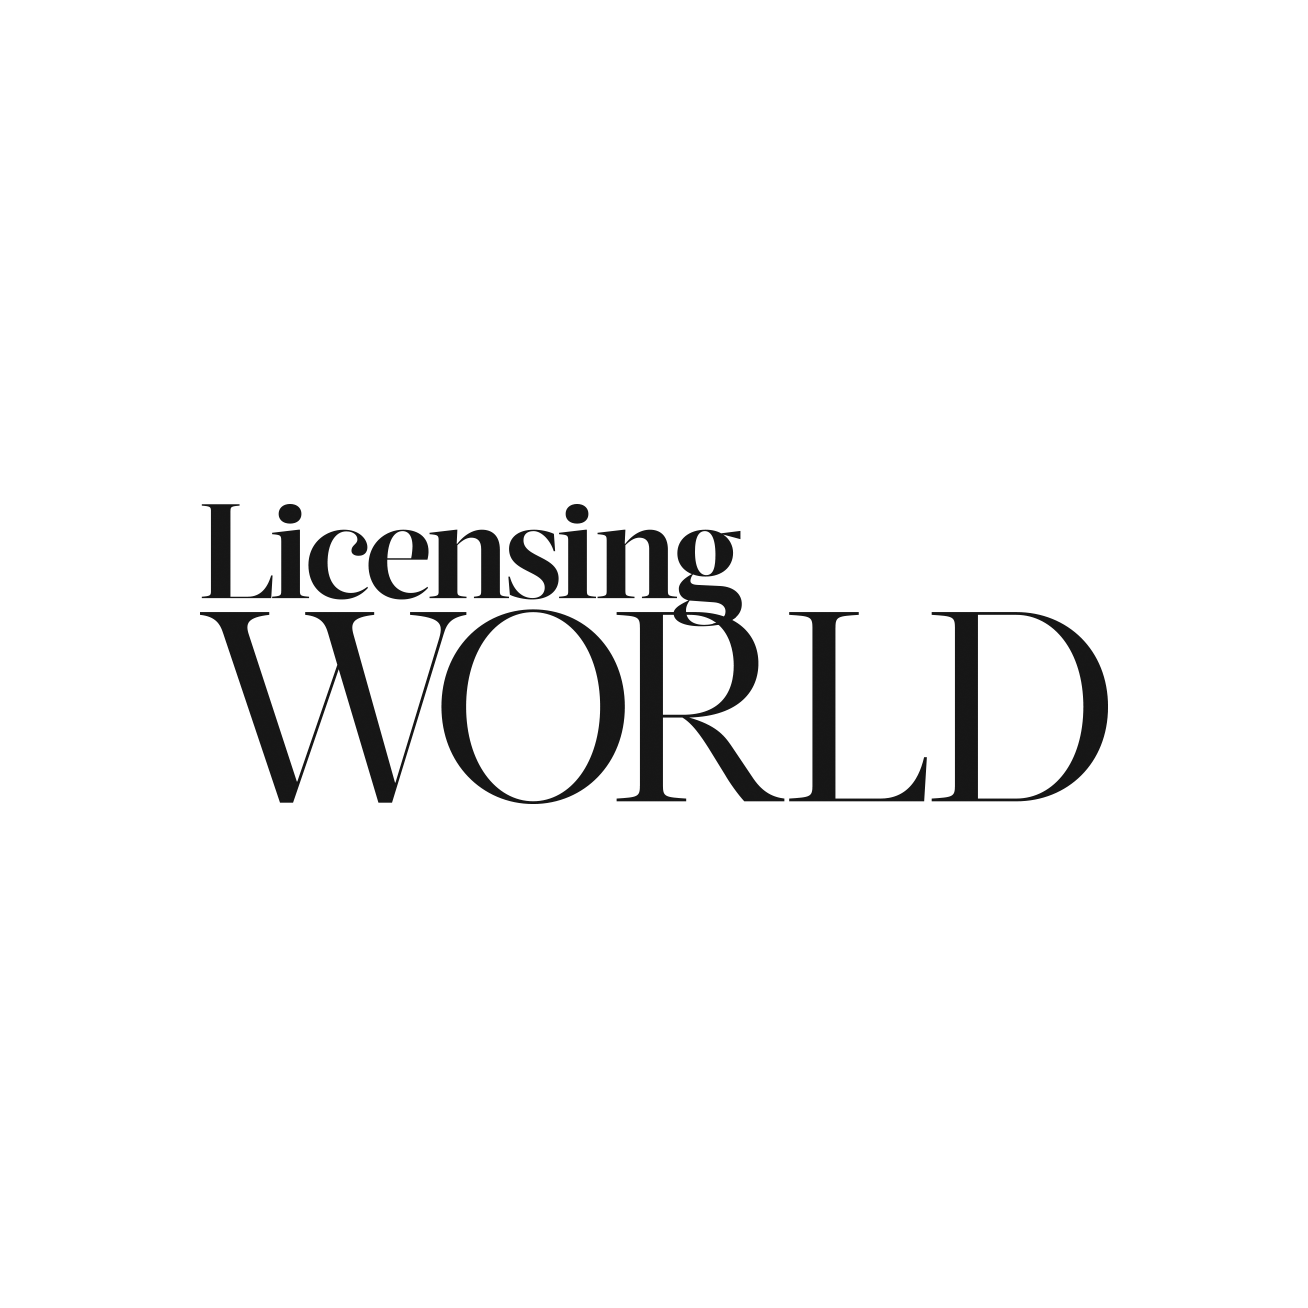 Licensing World - Grayscale